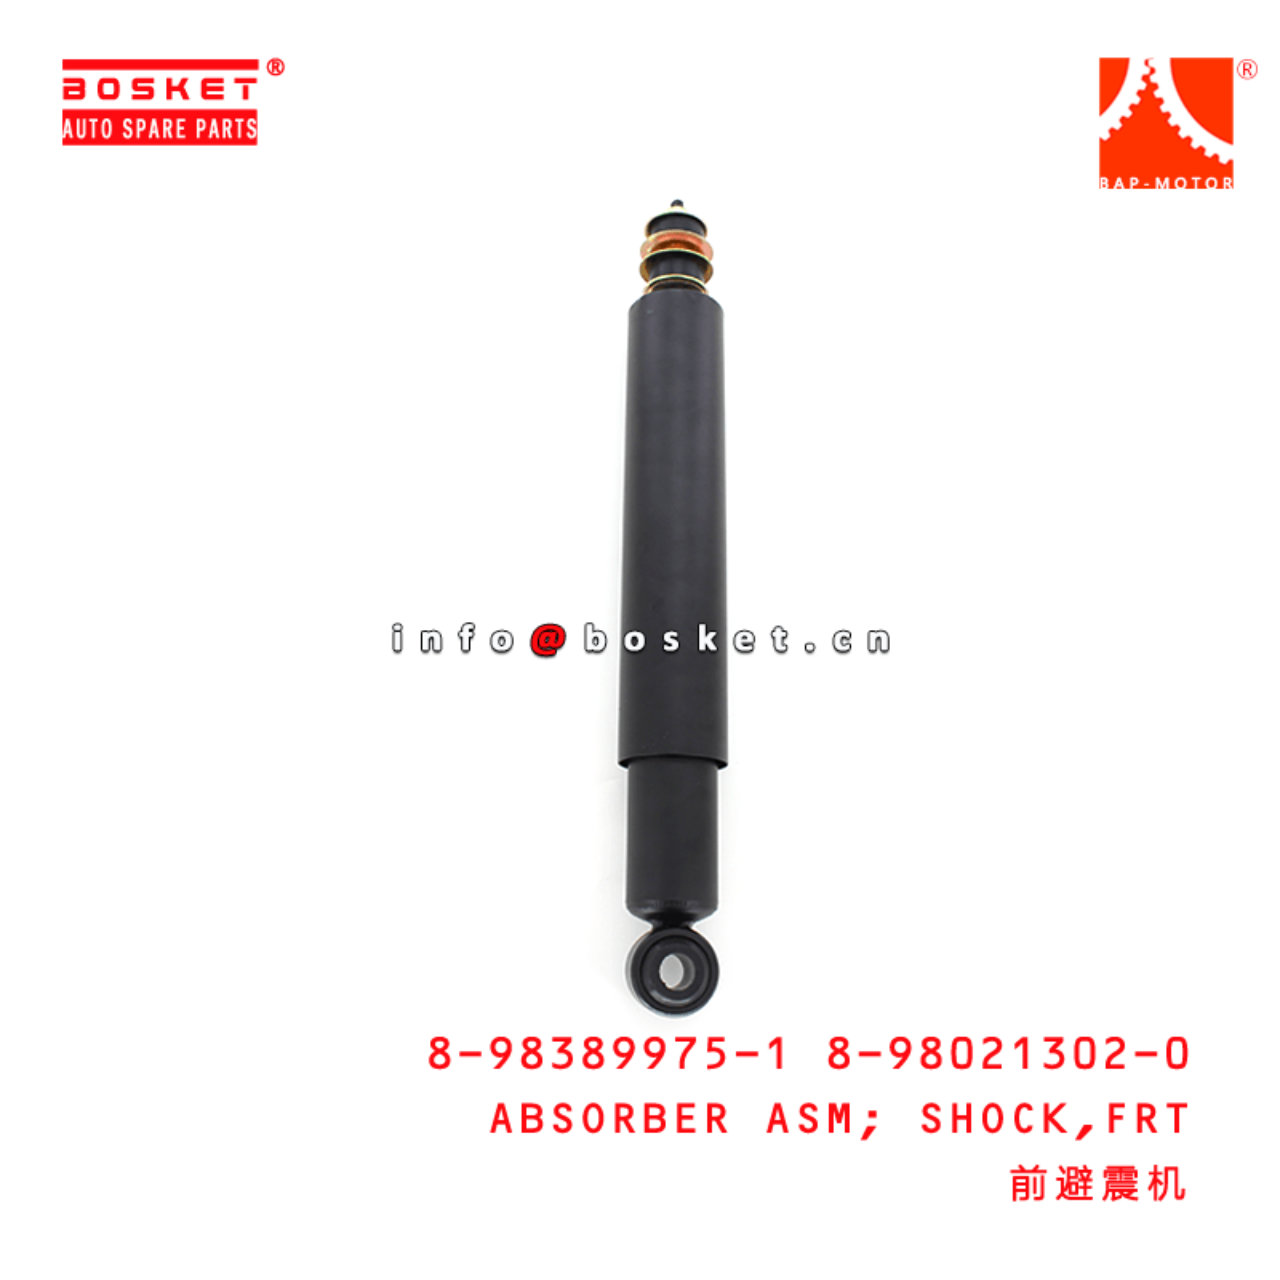 8-98389975-1 8-98021302-0 Front Shock Absorber Assembly 8983899751 8980213020 Suitable for ISUZU FTR